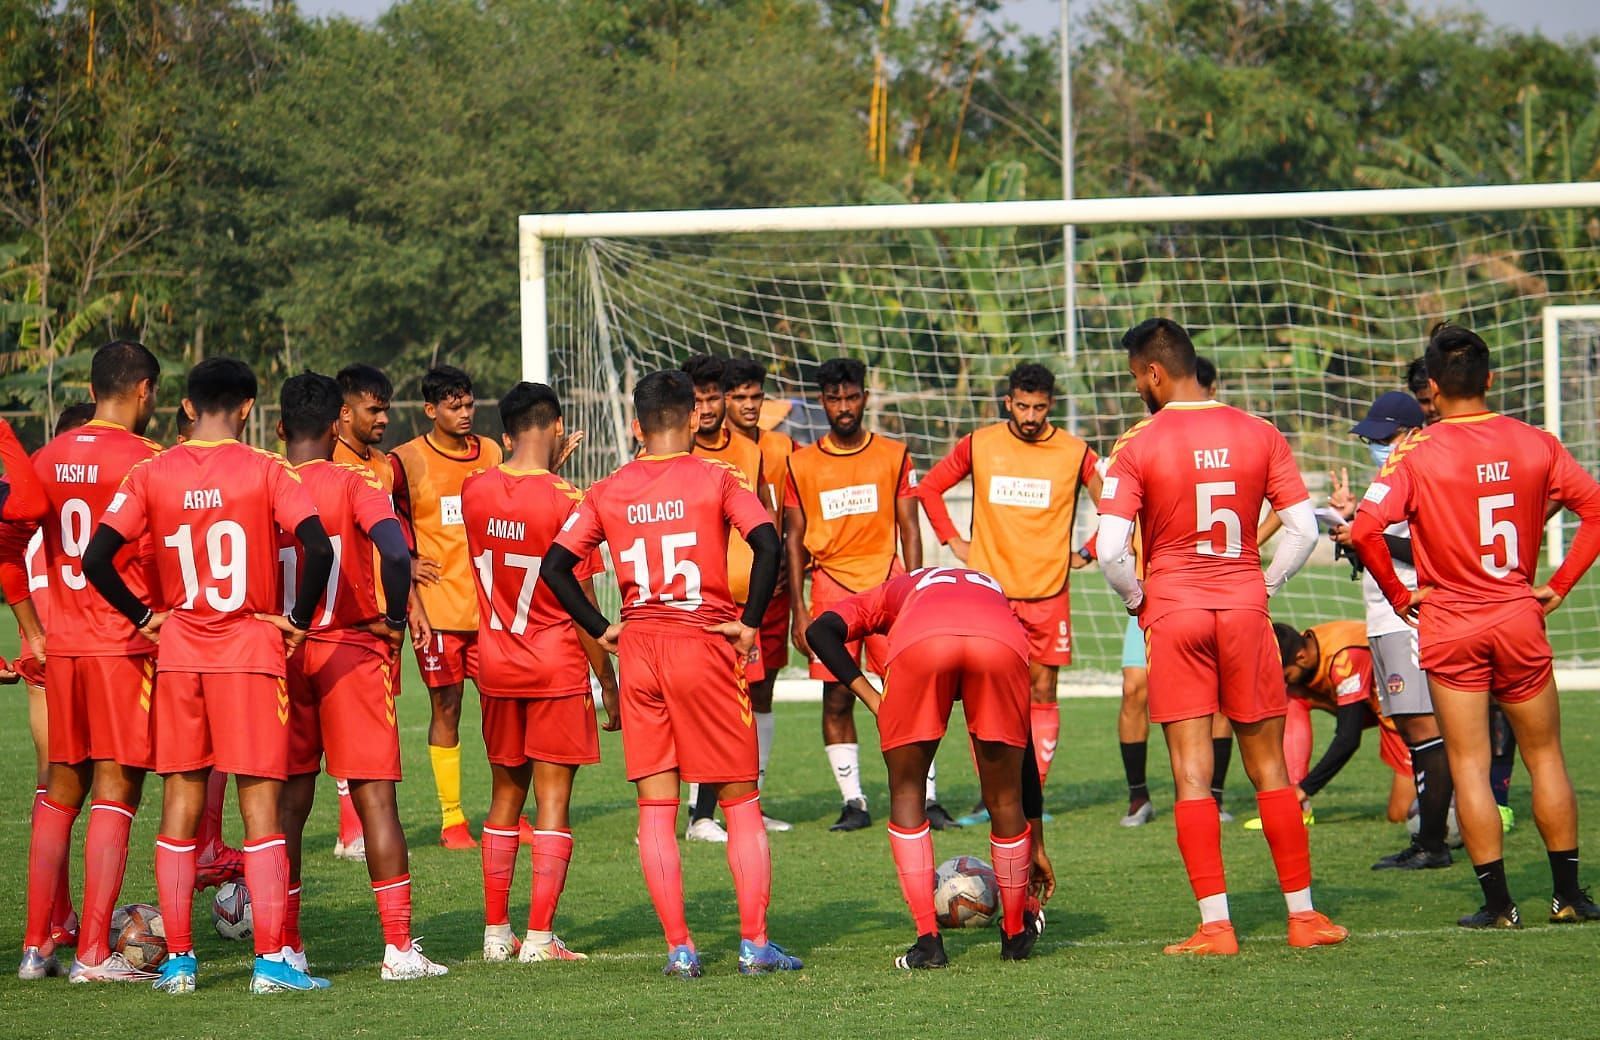 Kenkre FC coach addressing their players during a training session ahead of their season opener against Real Kashmir FC - Image Courtesy: I-League Twiter